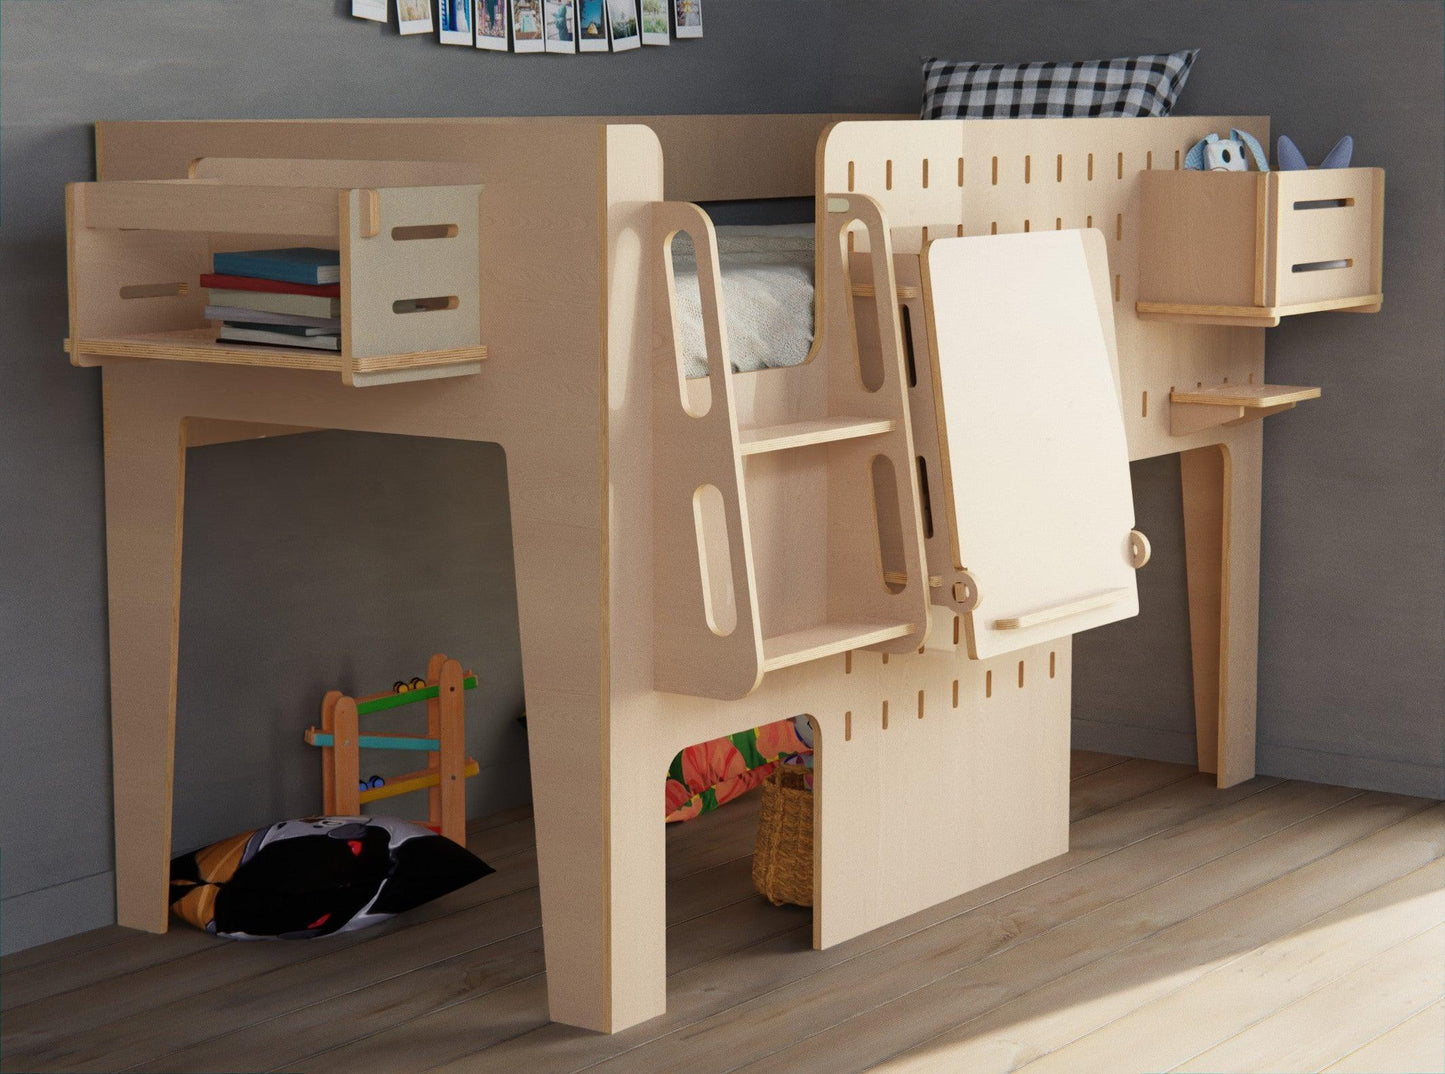 Elegant children's plywood loft bed featuring a handy study table.